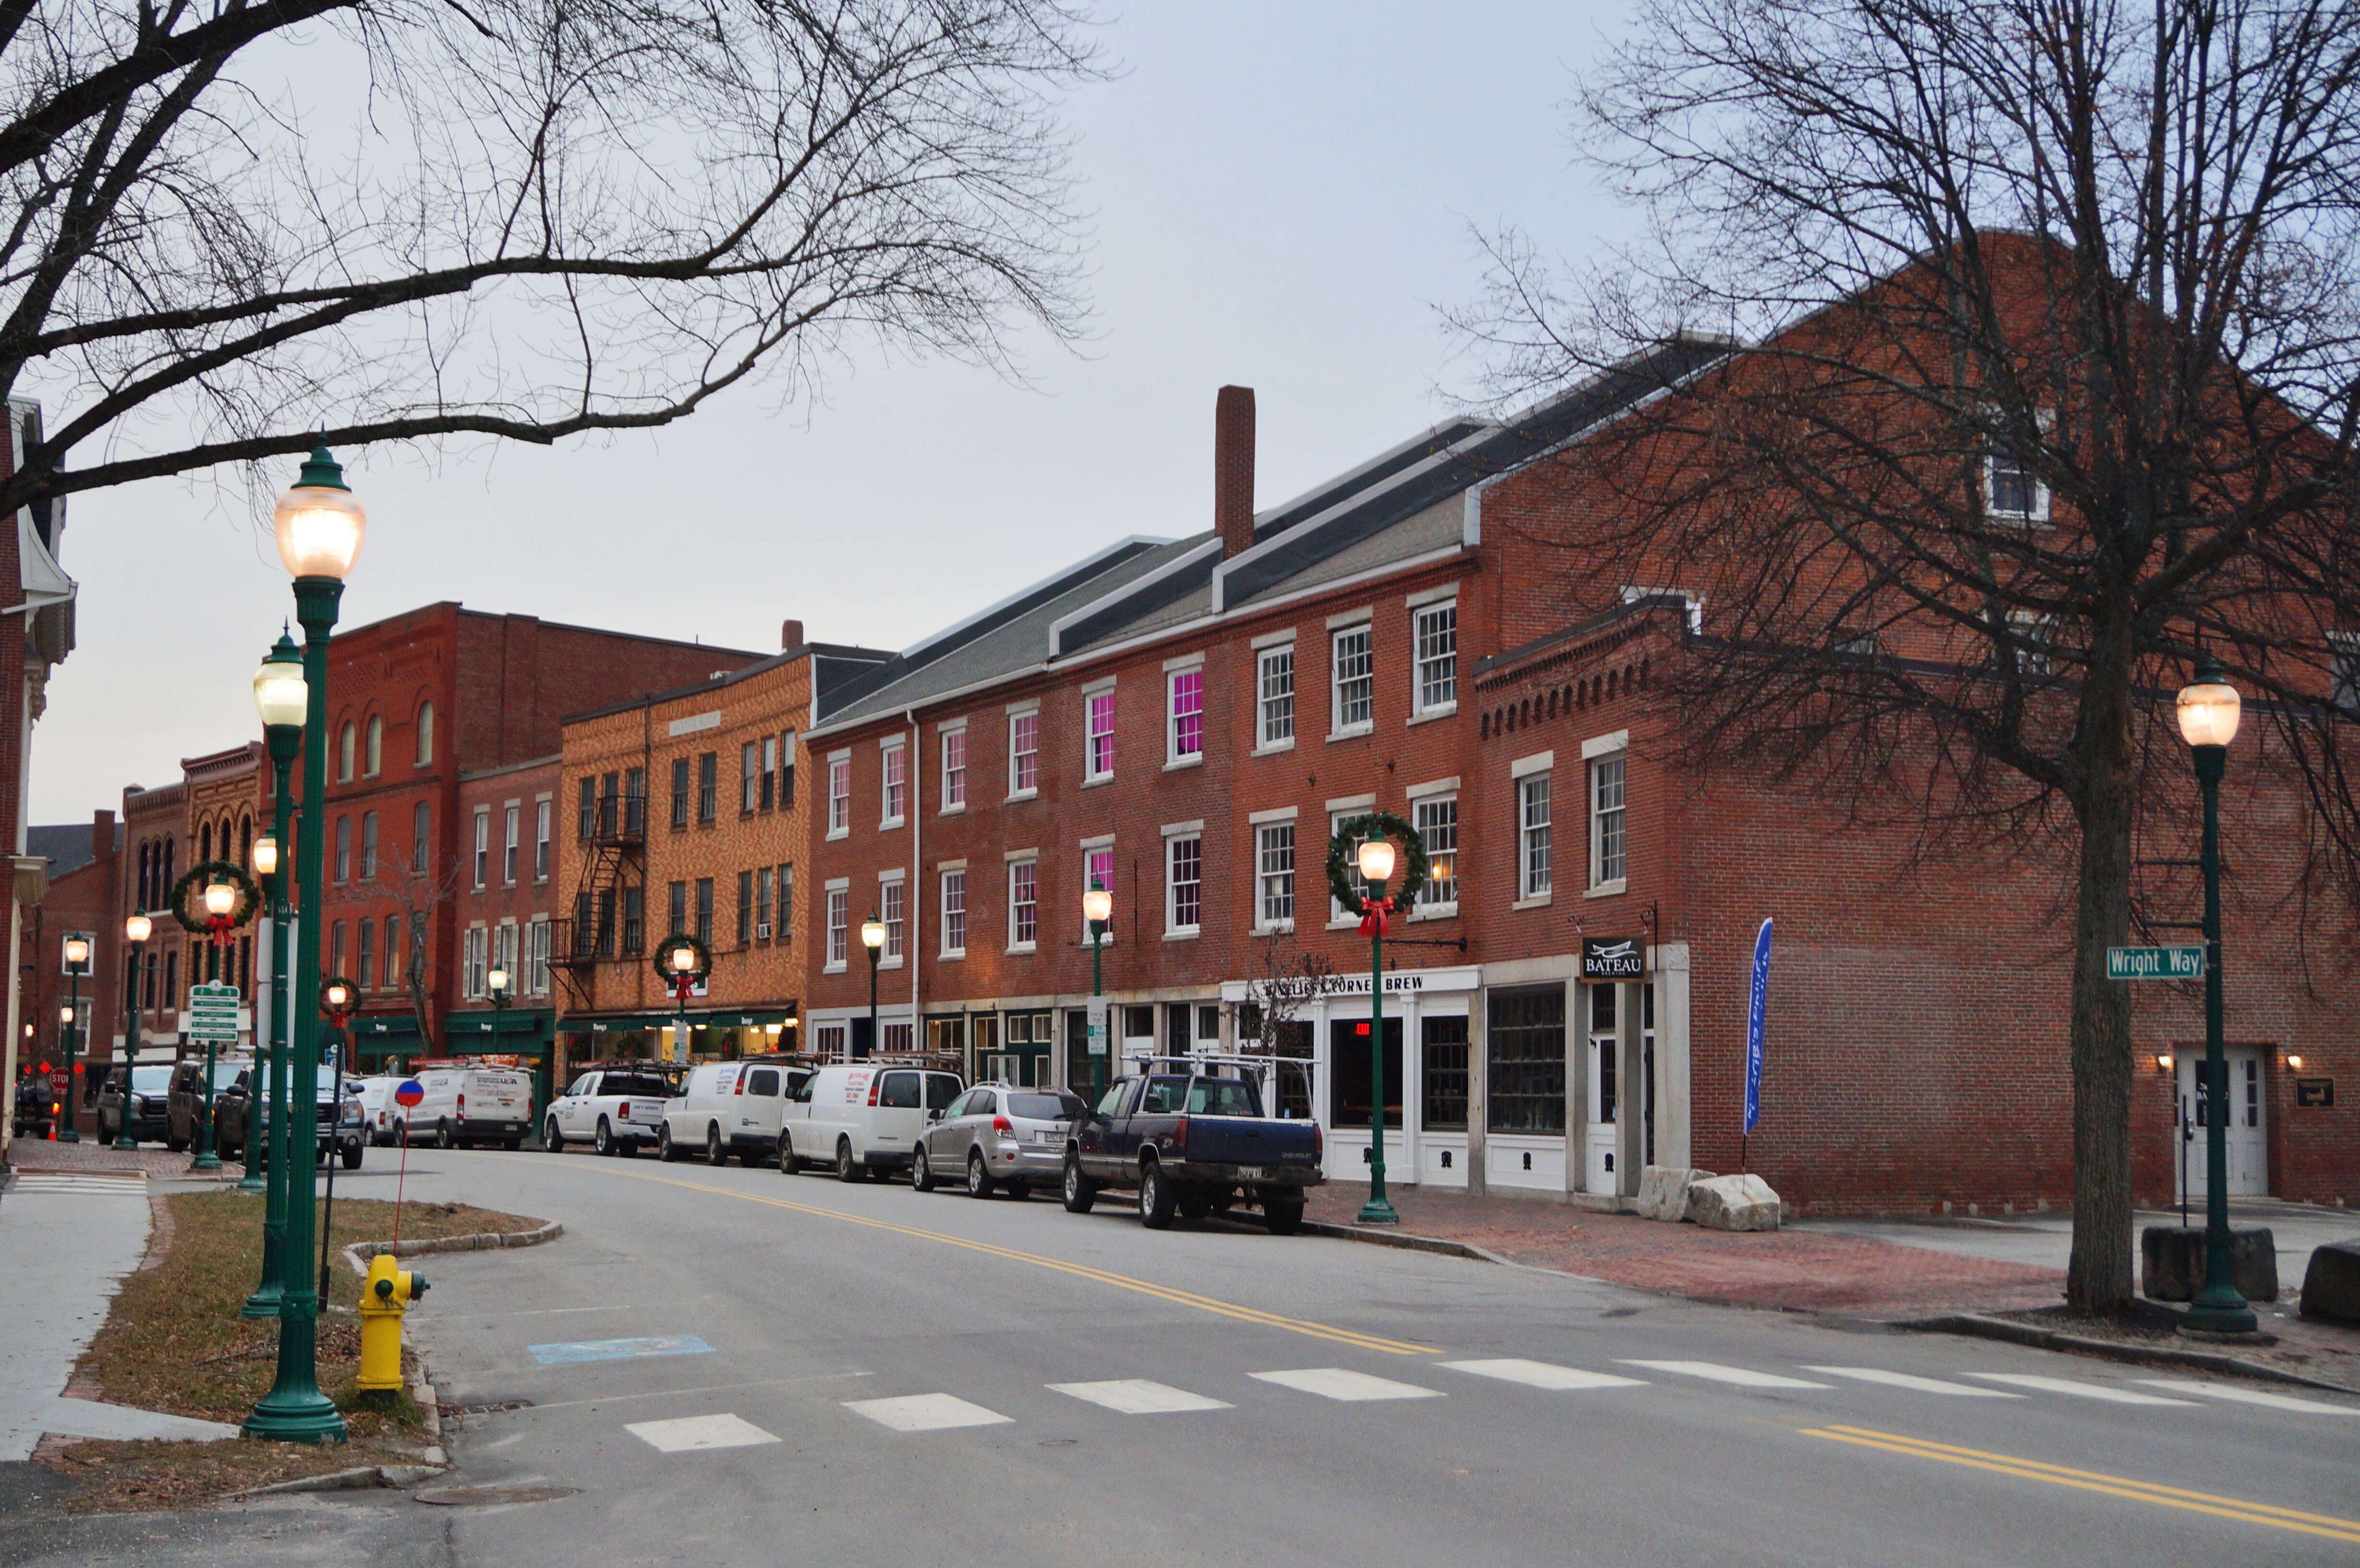 A downtown street with old three-story brick buildings